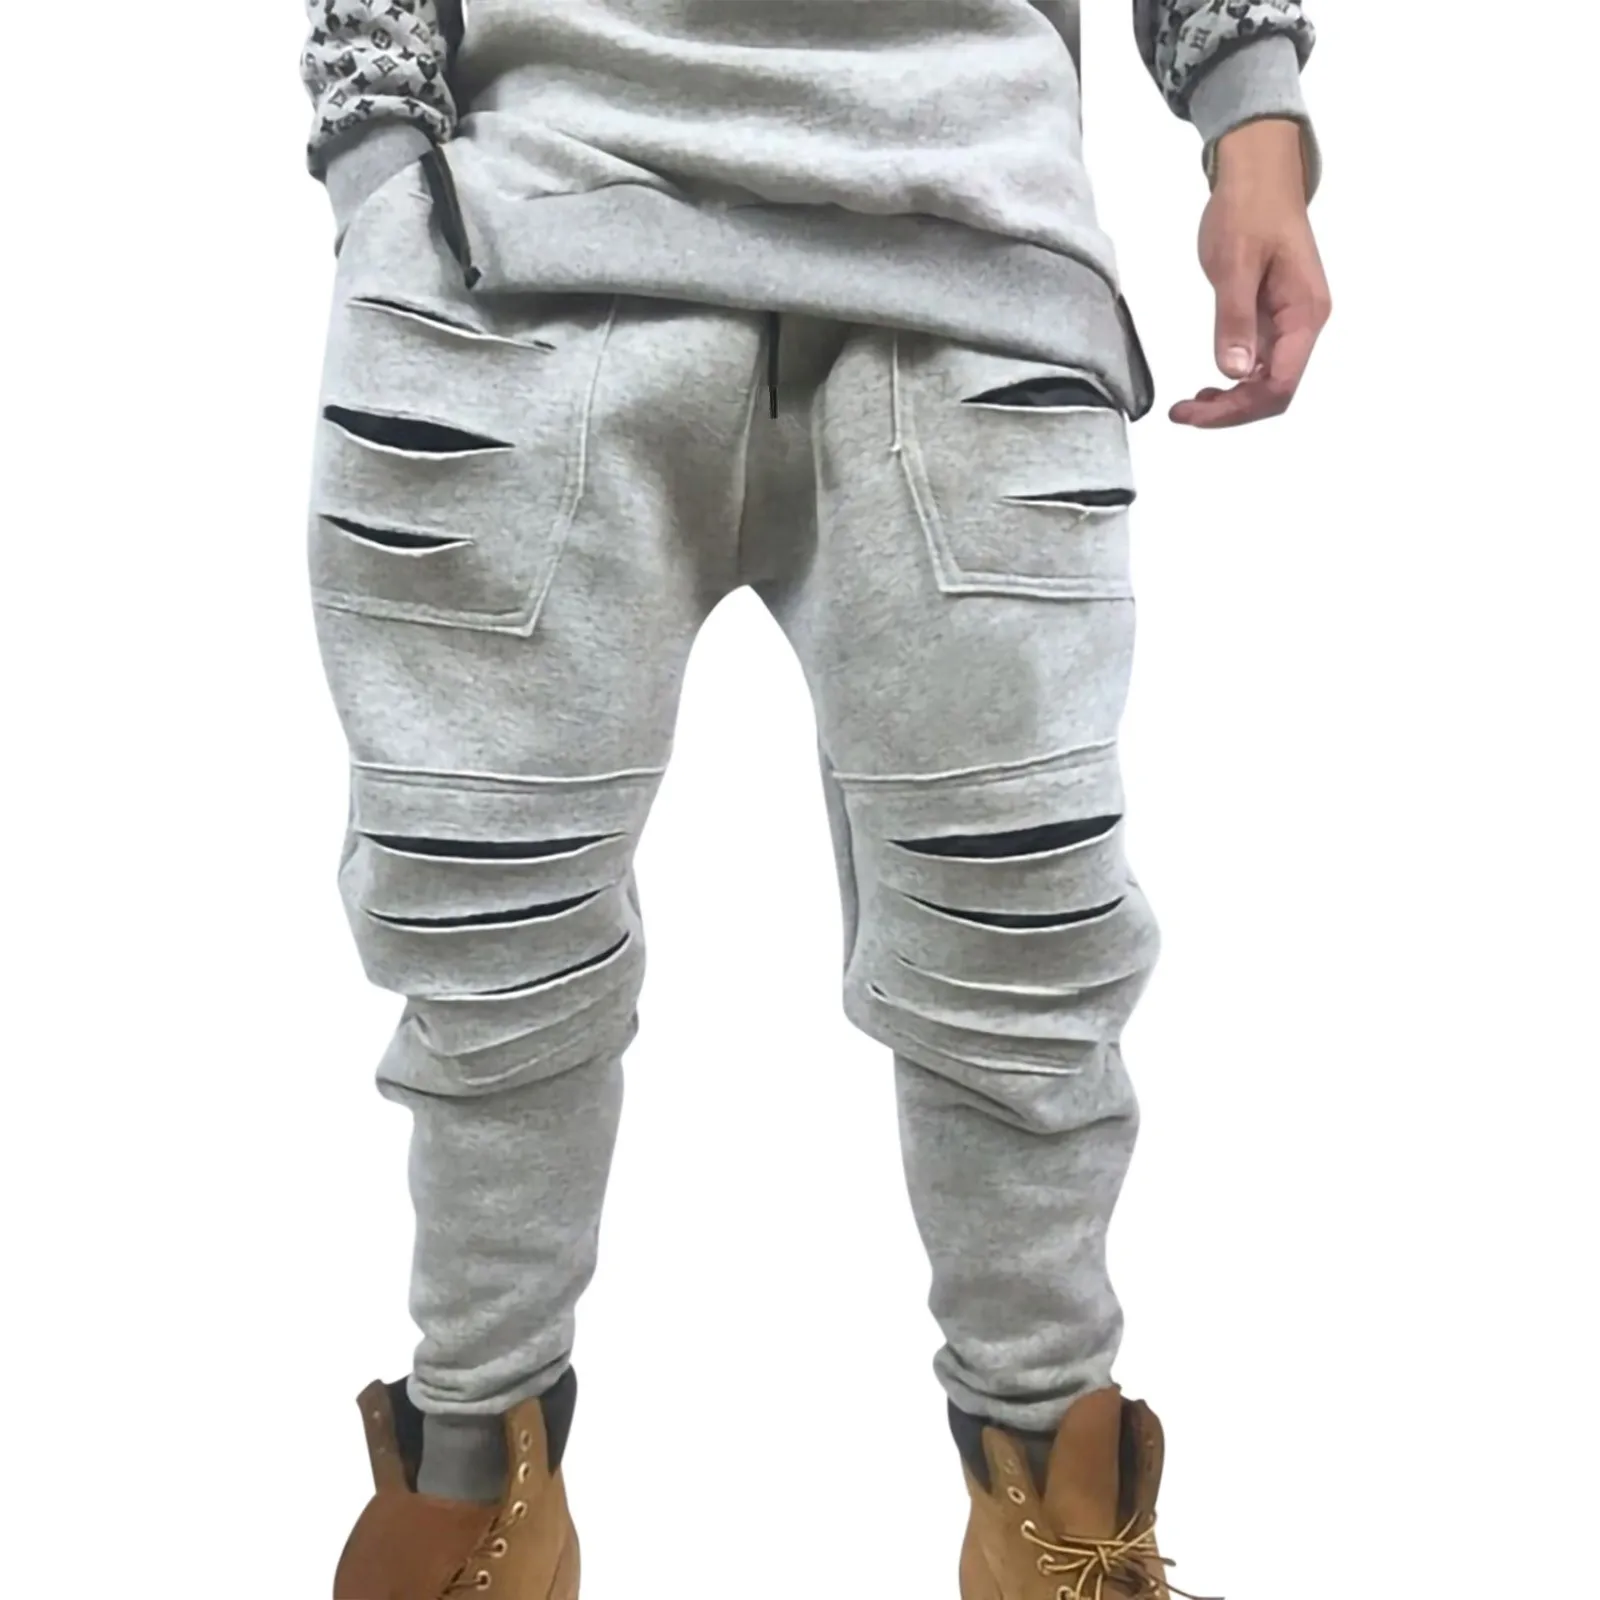 Men's Sports Tracksuit Pants Sweatpants Loose Ripped Trousers Casual Jogging Street Pants With Pockets Streetwear gym joggers for men Sweatpants